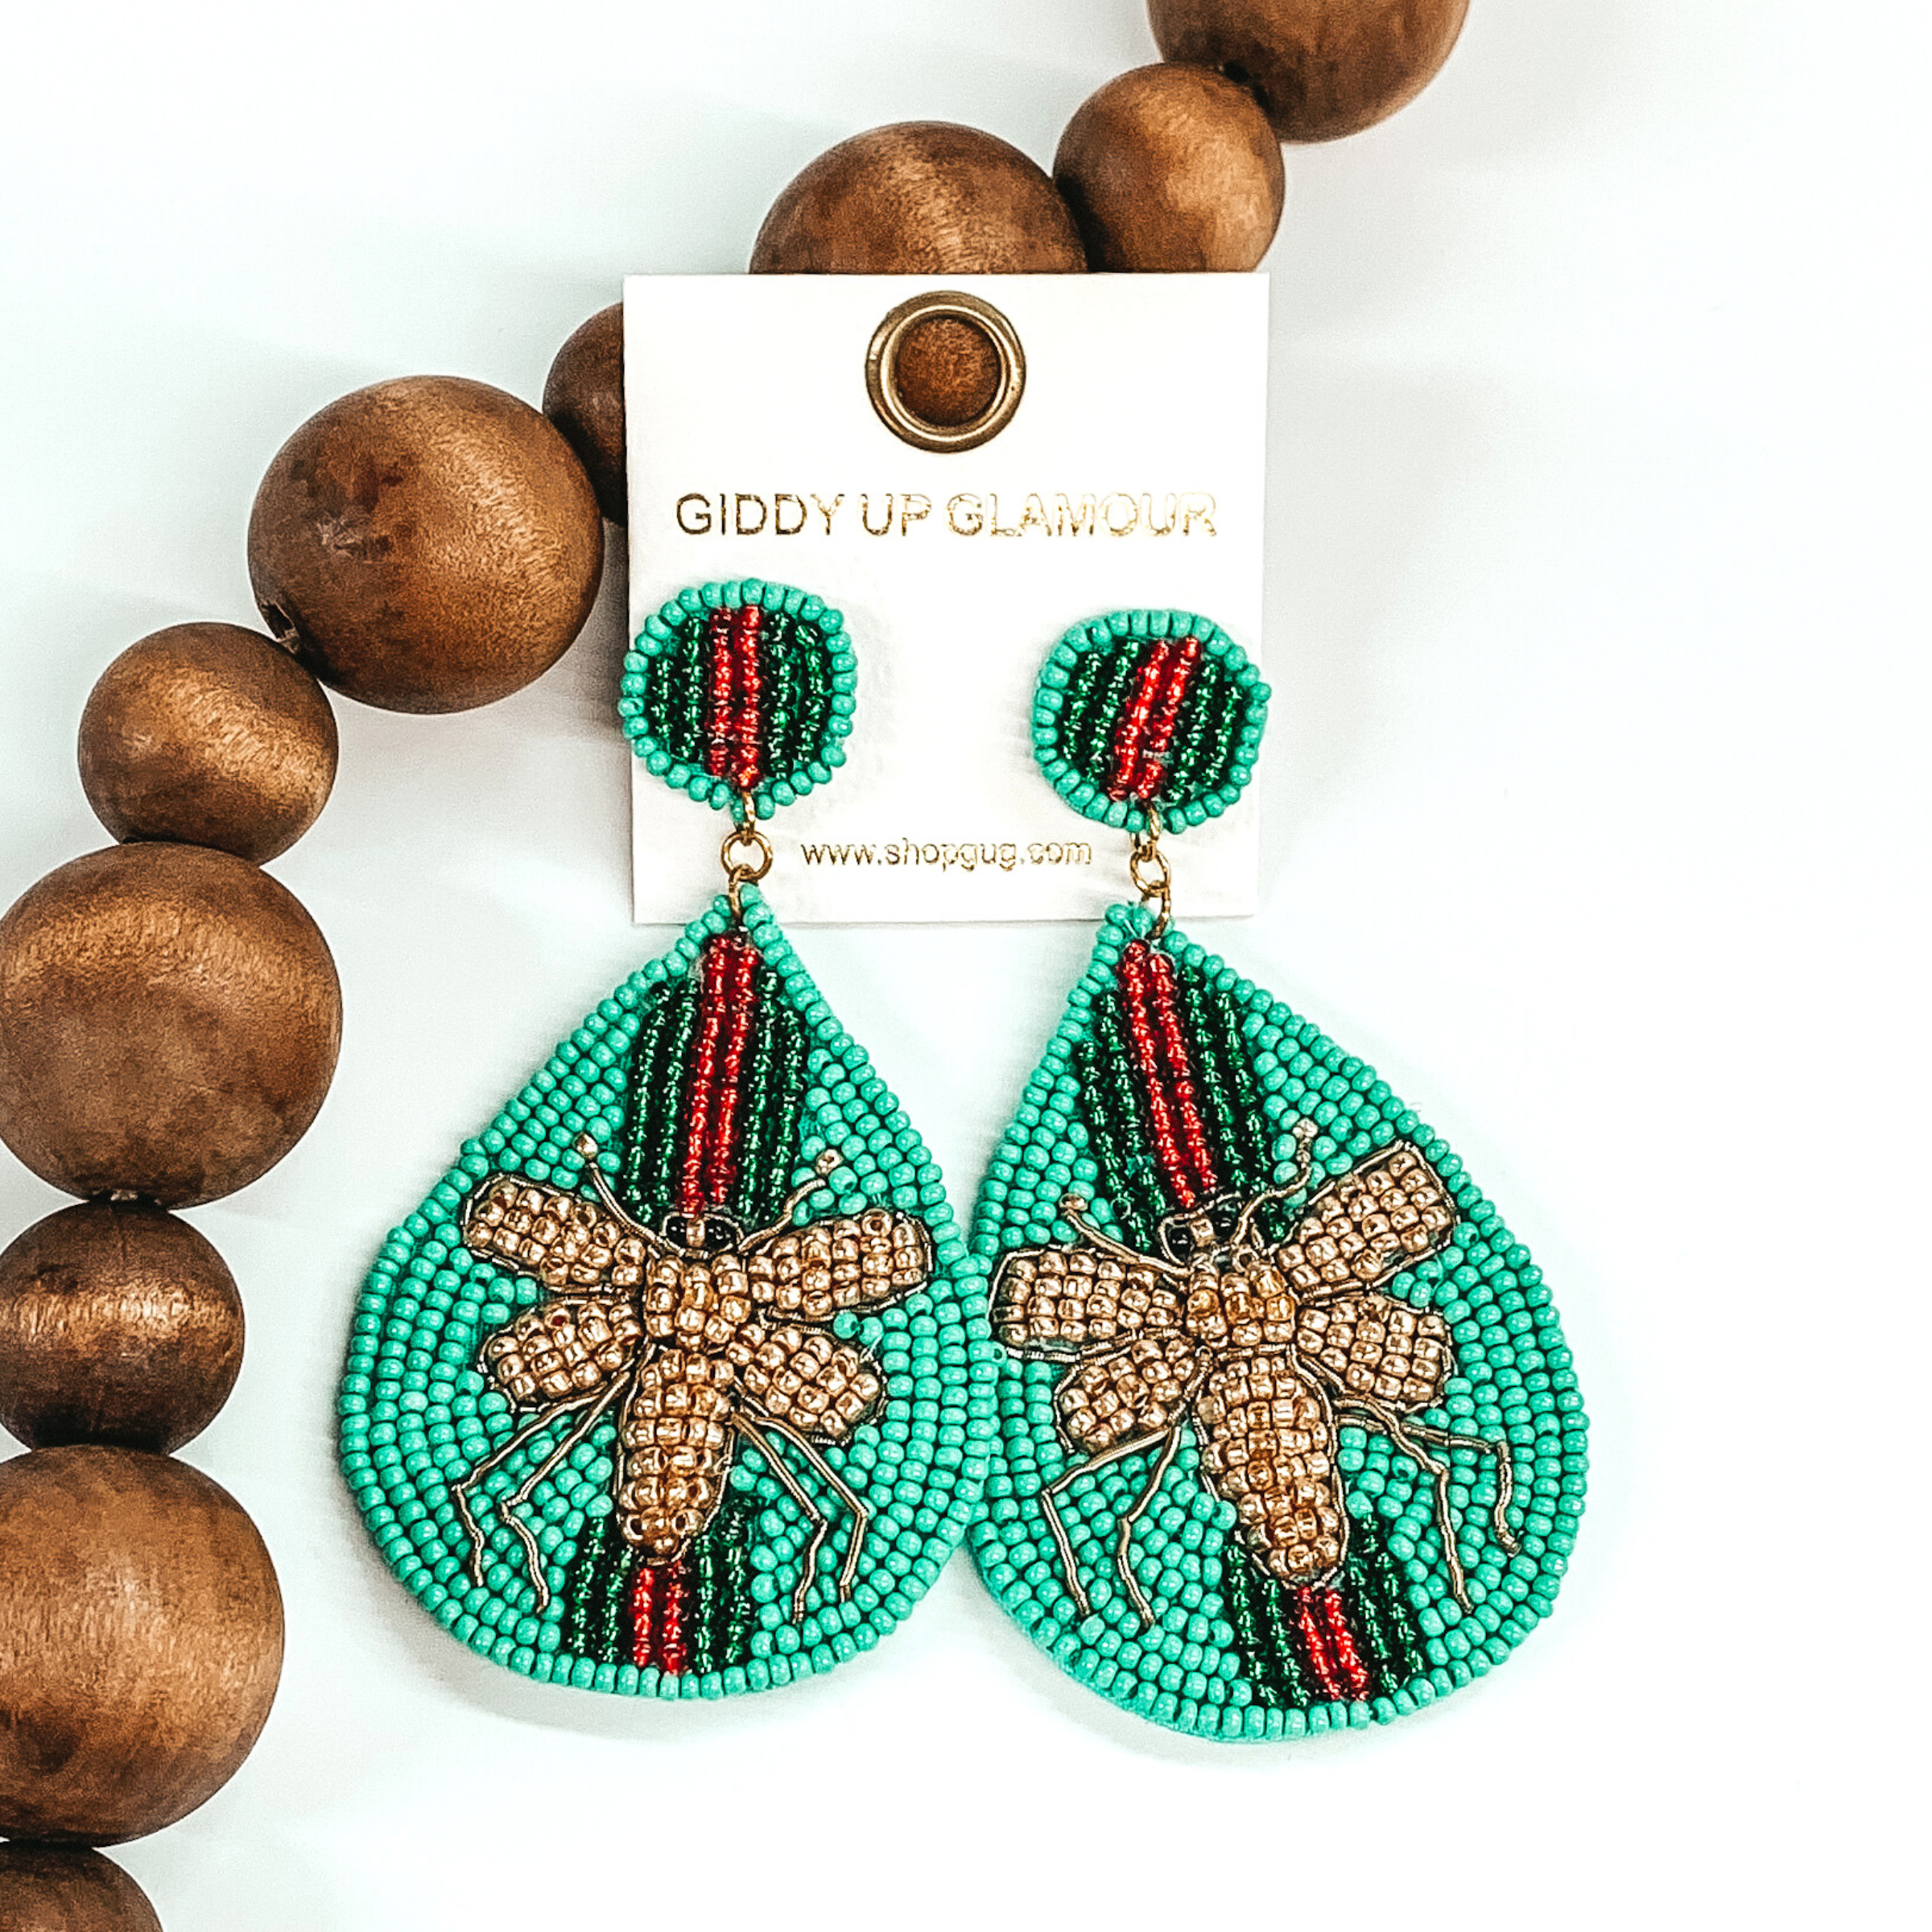 Circle beaded studs with a beaded teardrop dangle. The majority of the beads were turquoise with green and red stripes. The center of the teardrop was a gold beaded bee. These earrings are pictured on a white background with dark brown beads.